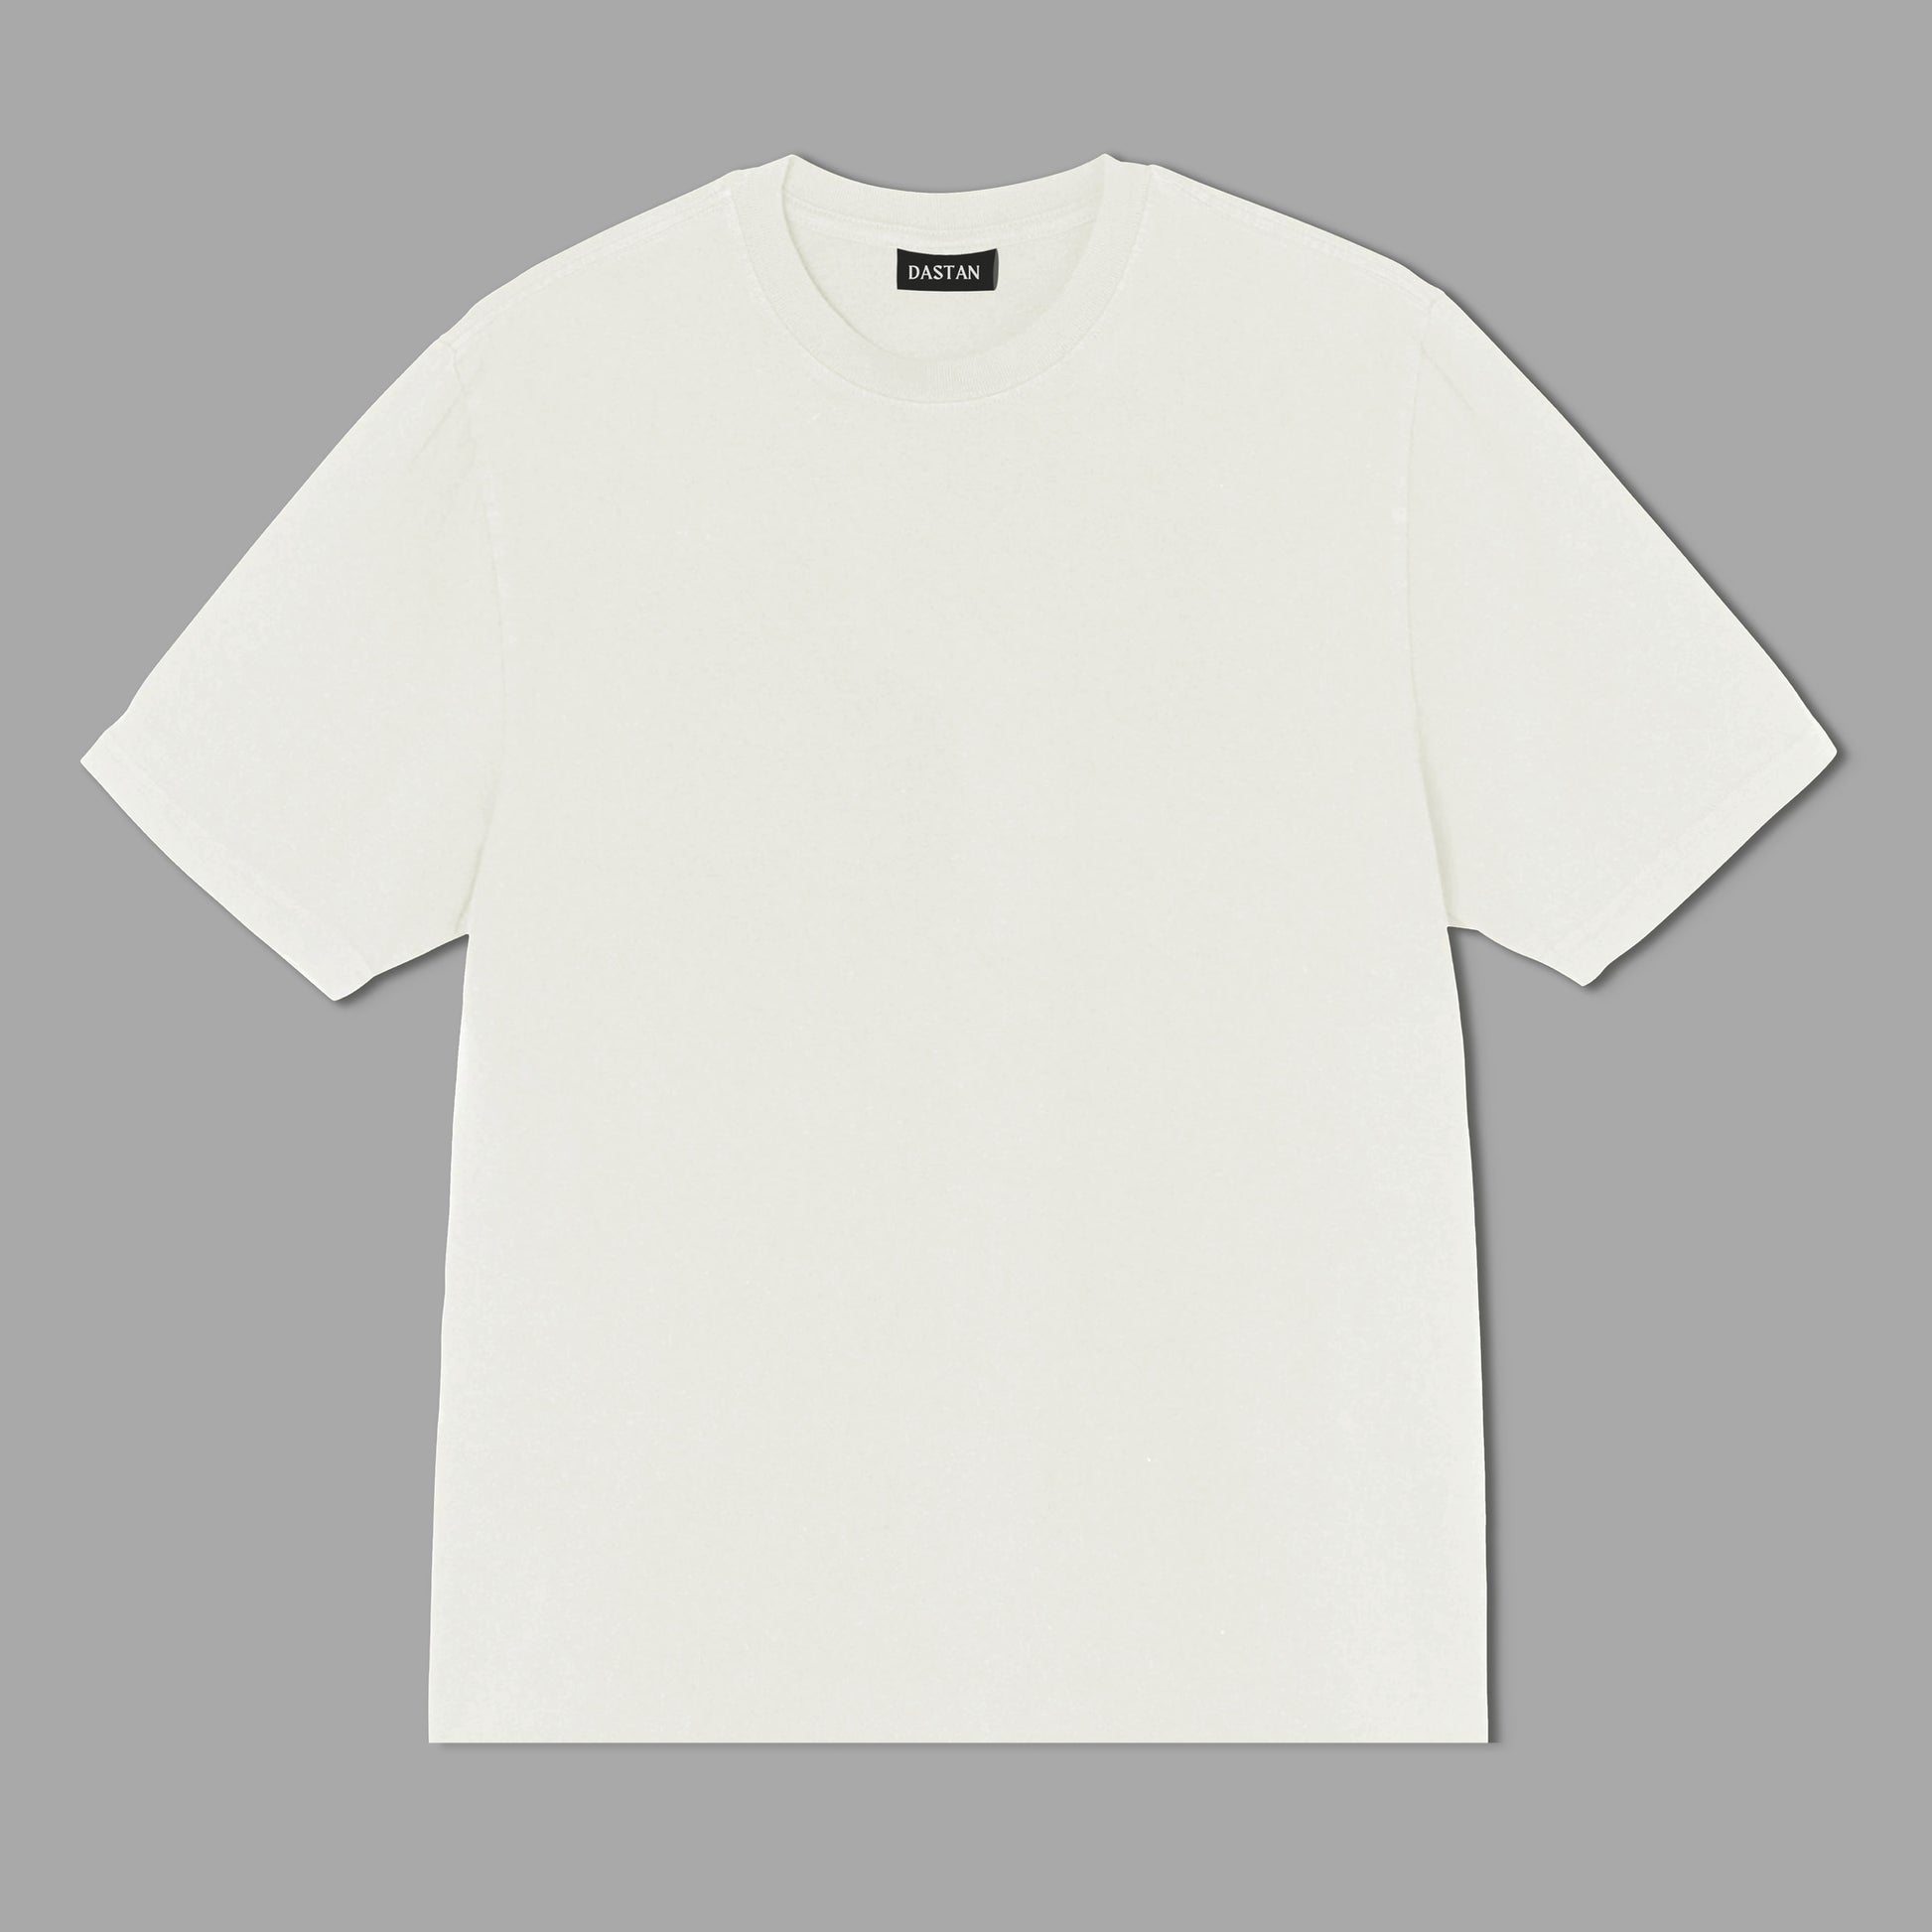 the solid off white boxy fit tee